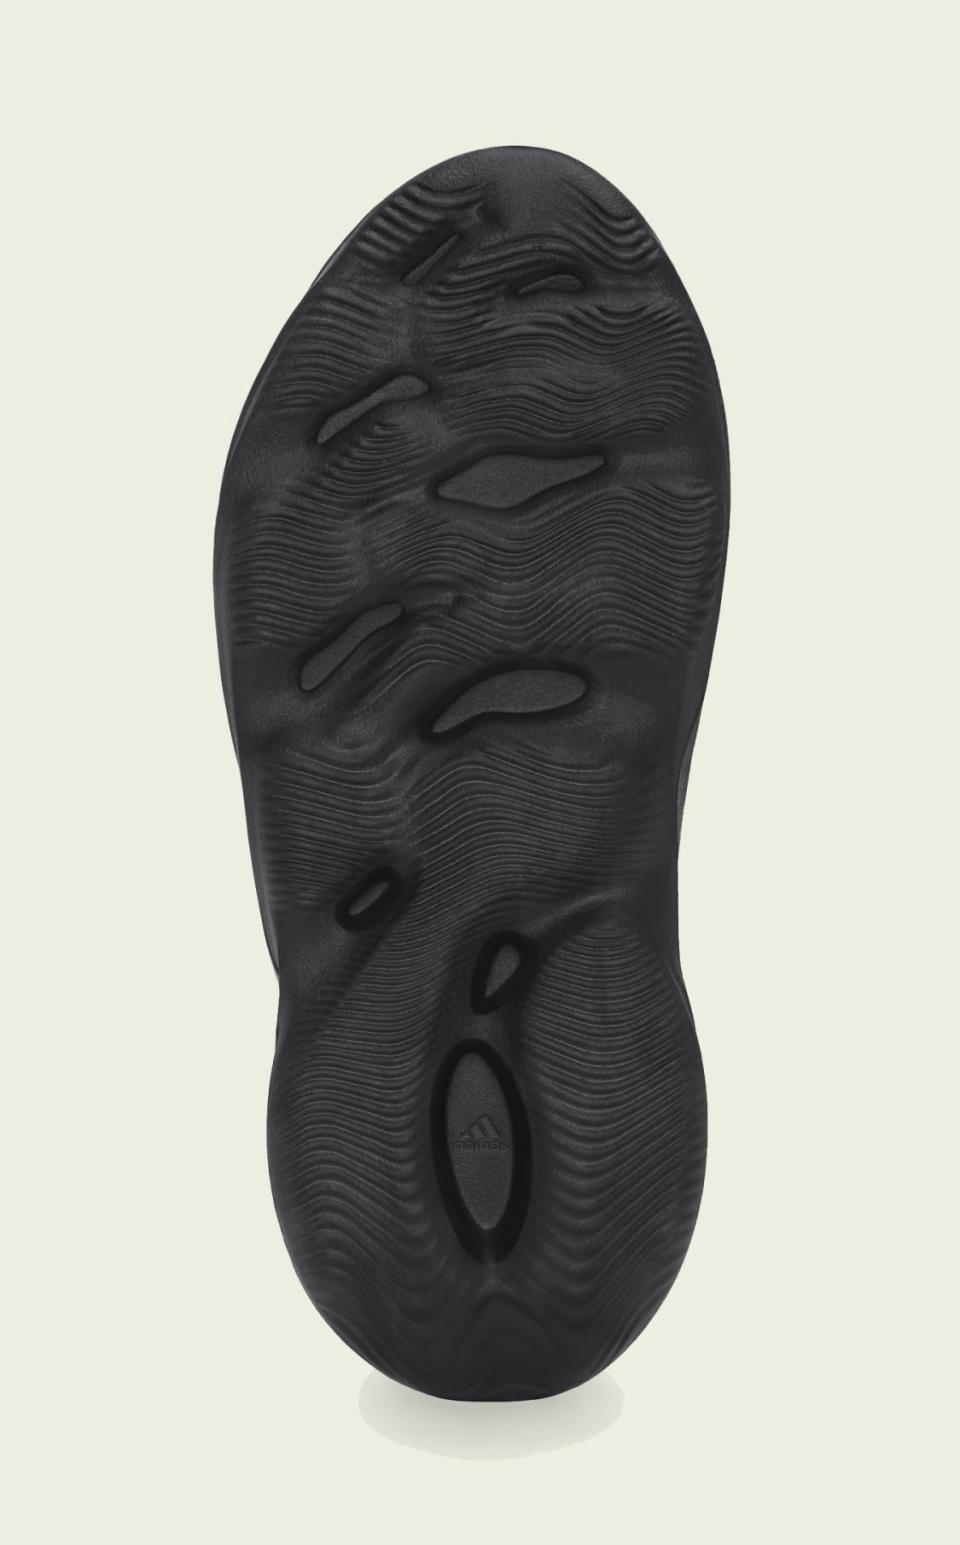 The outsole of the Adidas Yeezy Foam Runner “Onyx.” - Credit: Courtesy of Adidas